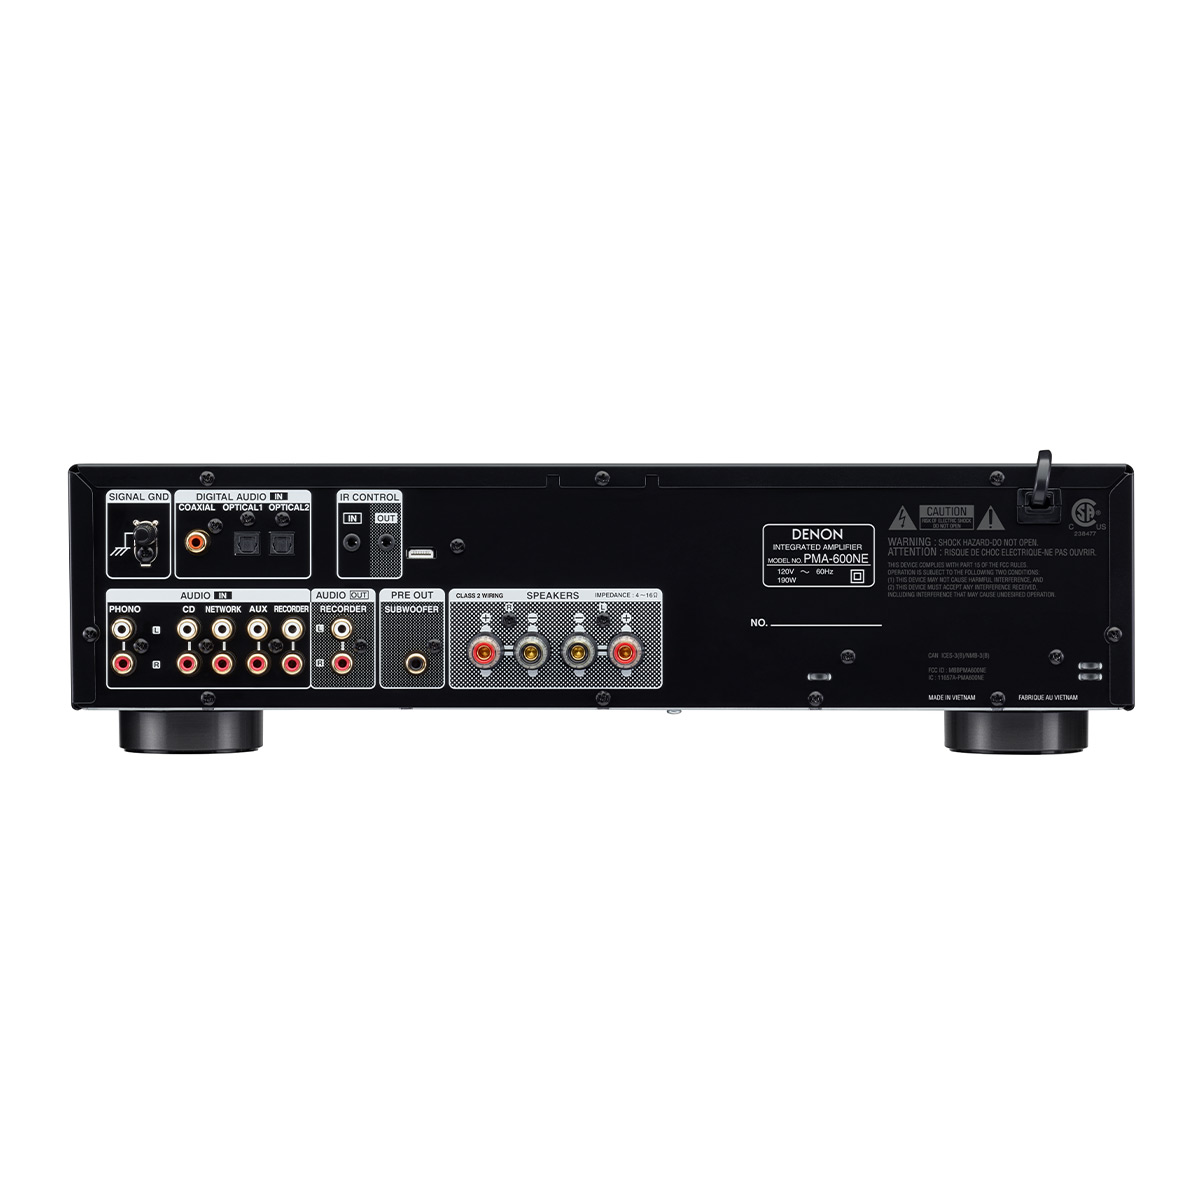 Denon PMA-600NE 2 Channel 70W Integrated Amplifier with Bluetooth - image 2 of 6